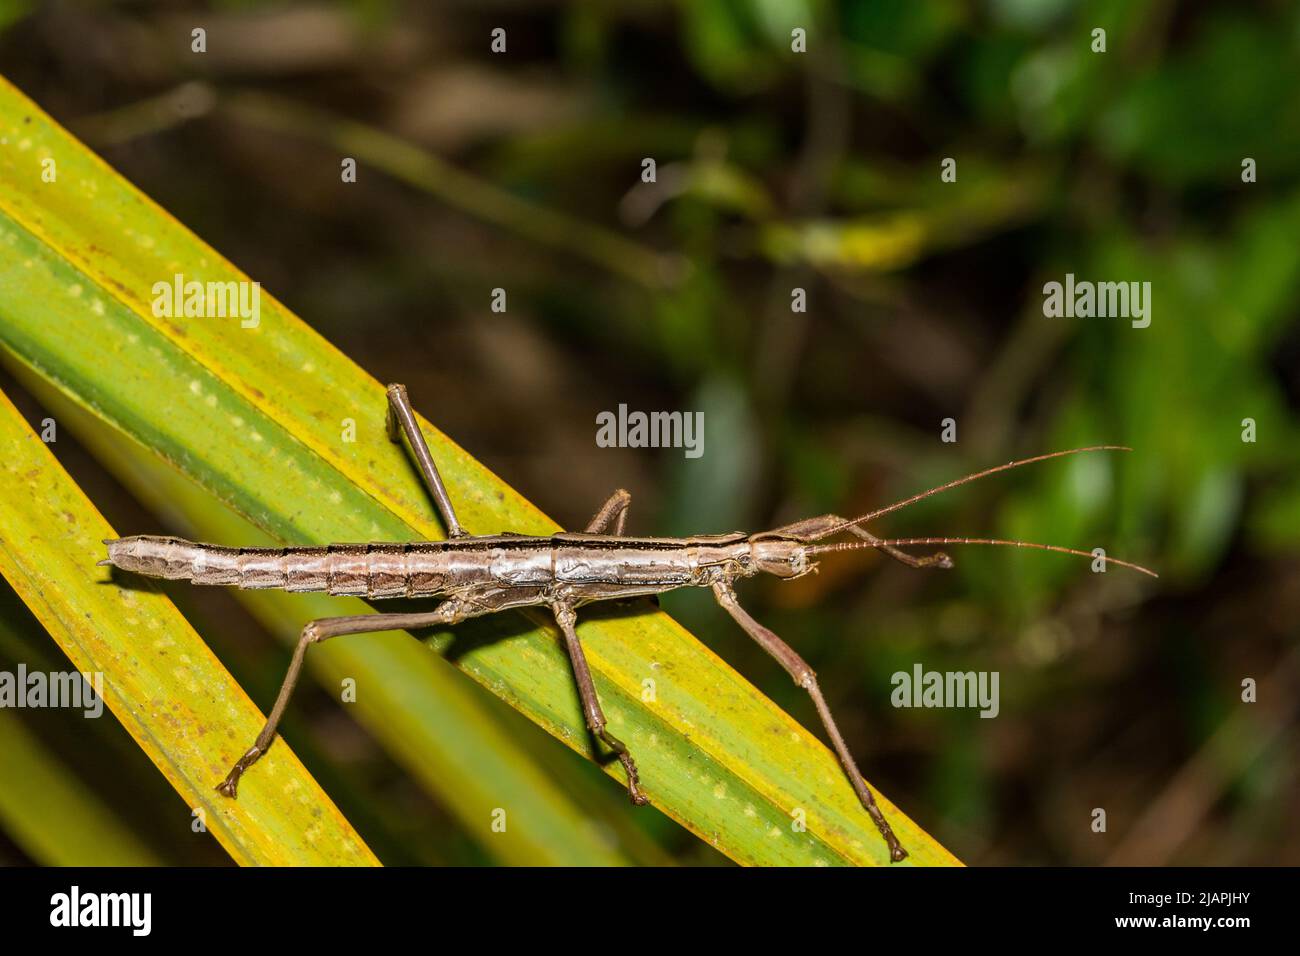 Southern Two-striped Walkingstick - Anisomorpha buprestoides Stock Photo